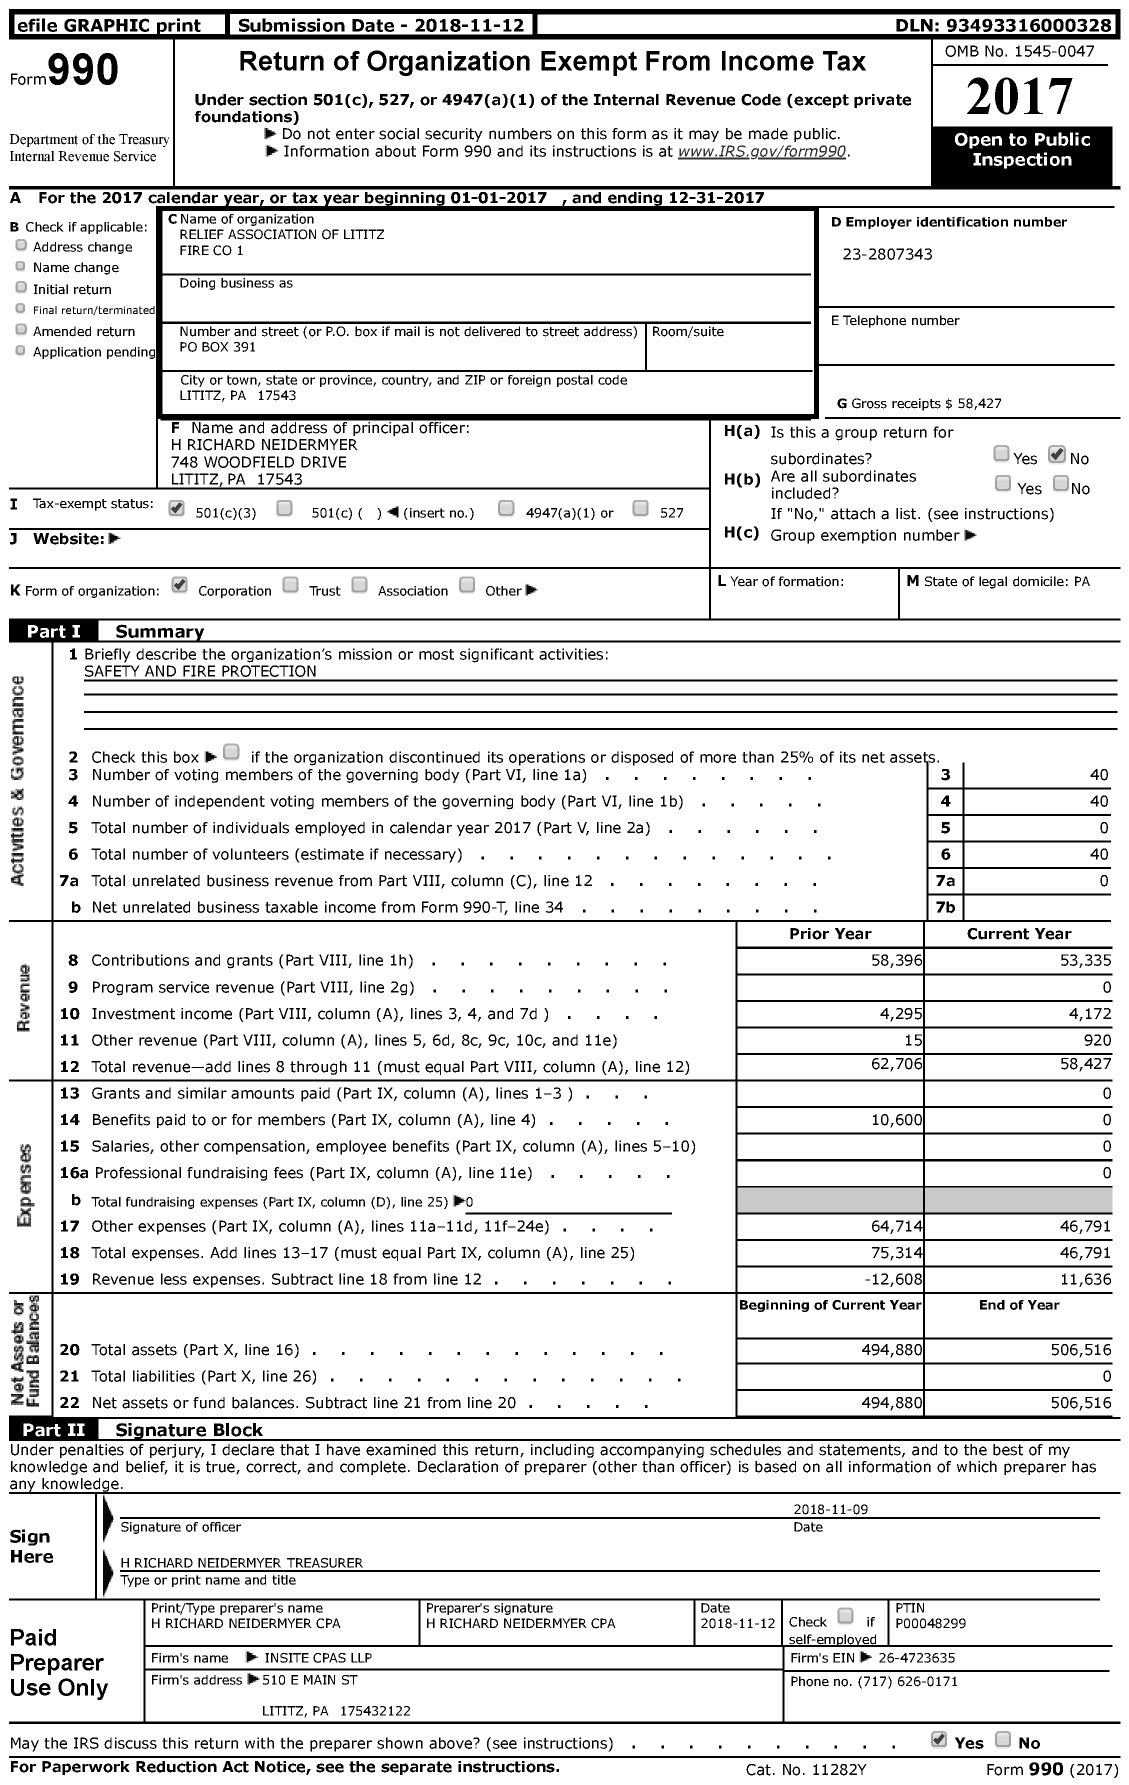 Image of first page of 2017 Form 990 for Relief Association of Lititz Fire Co No 1